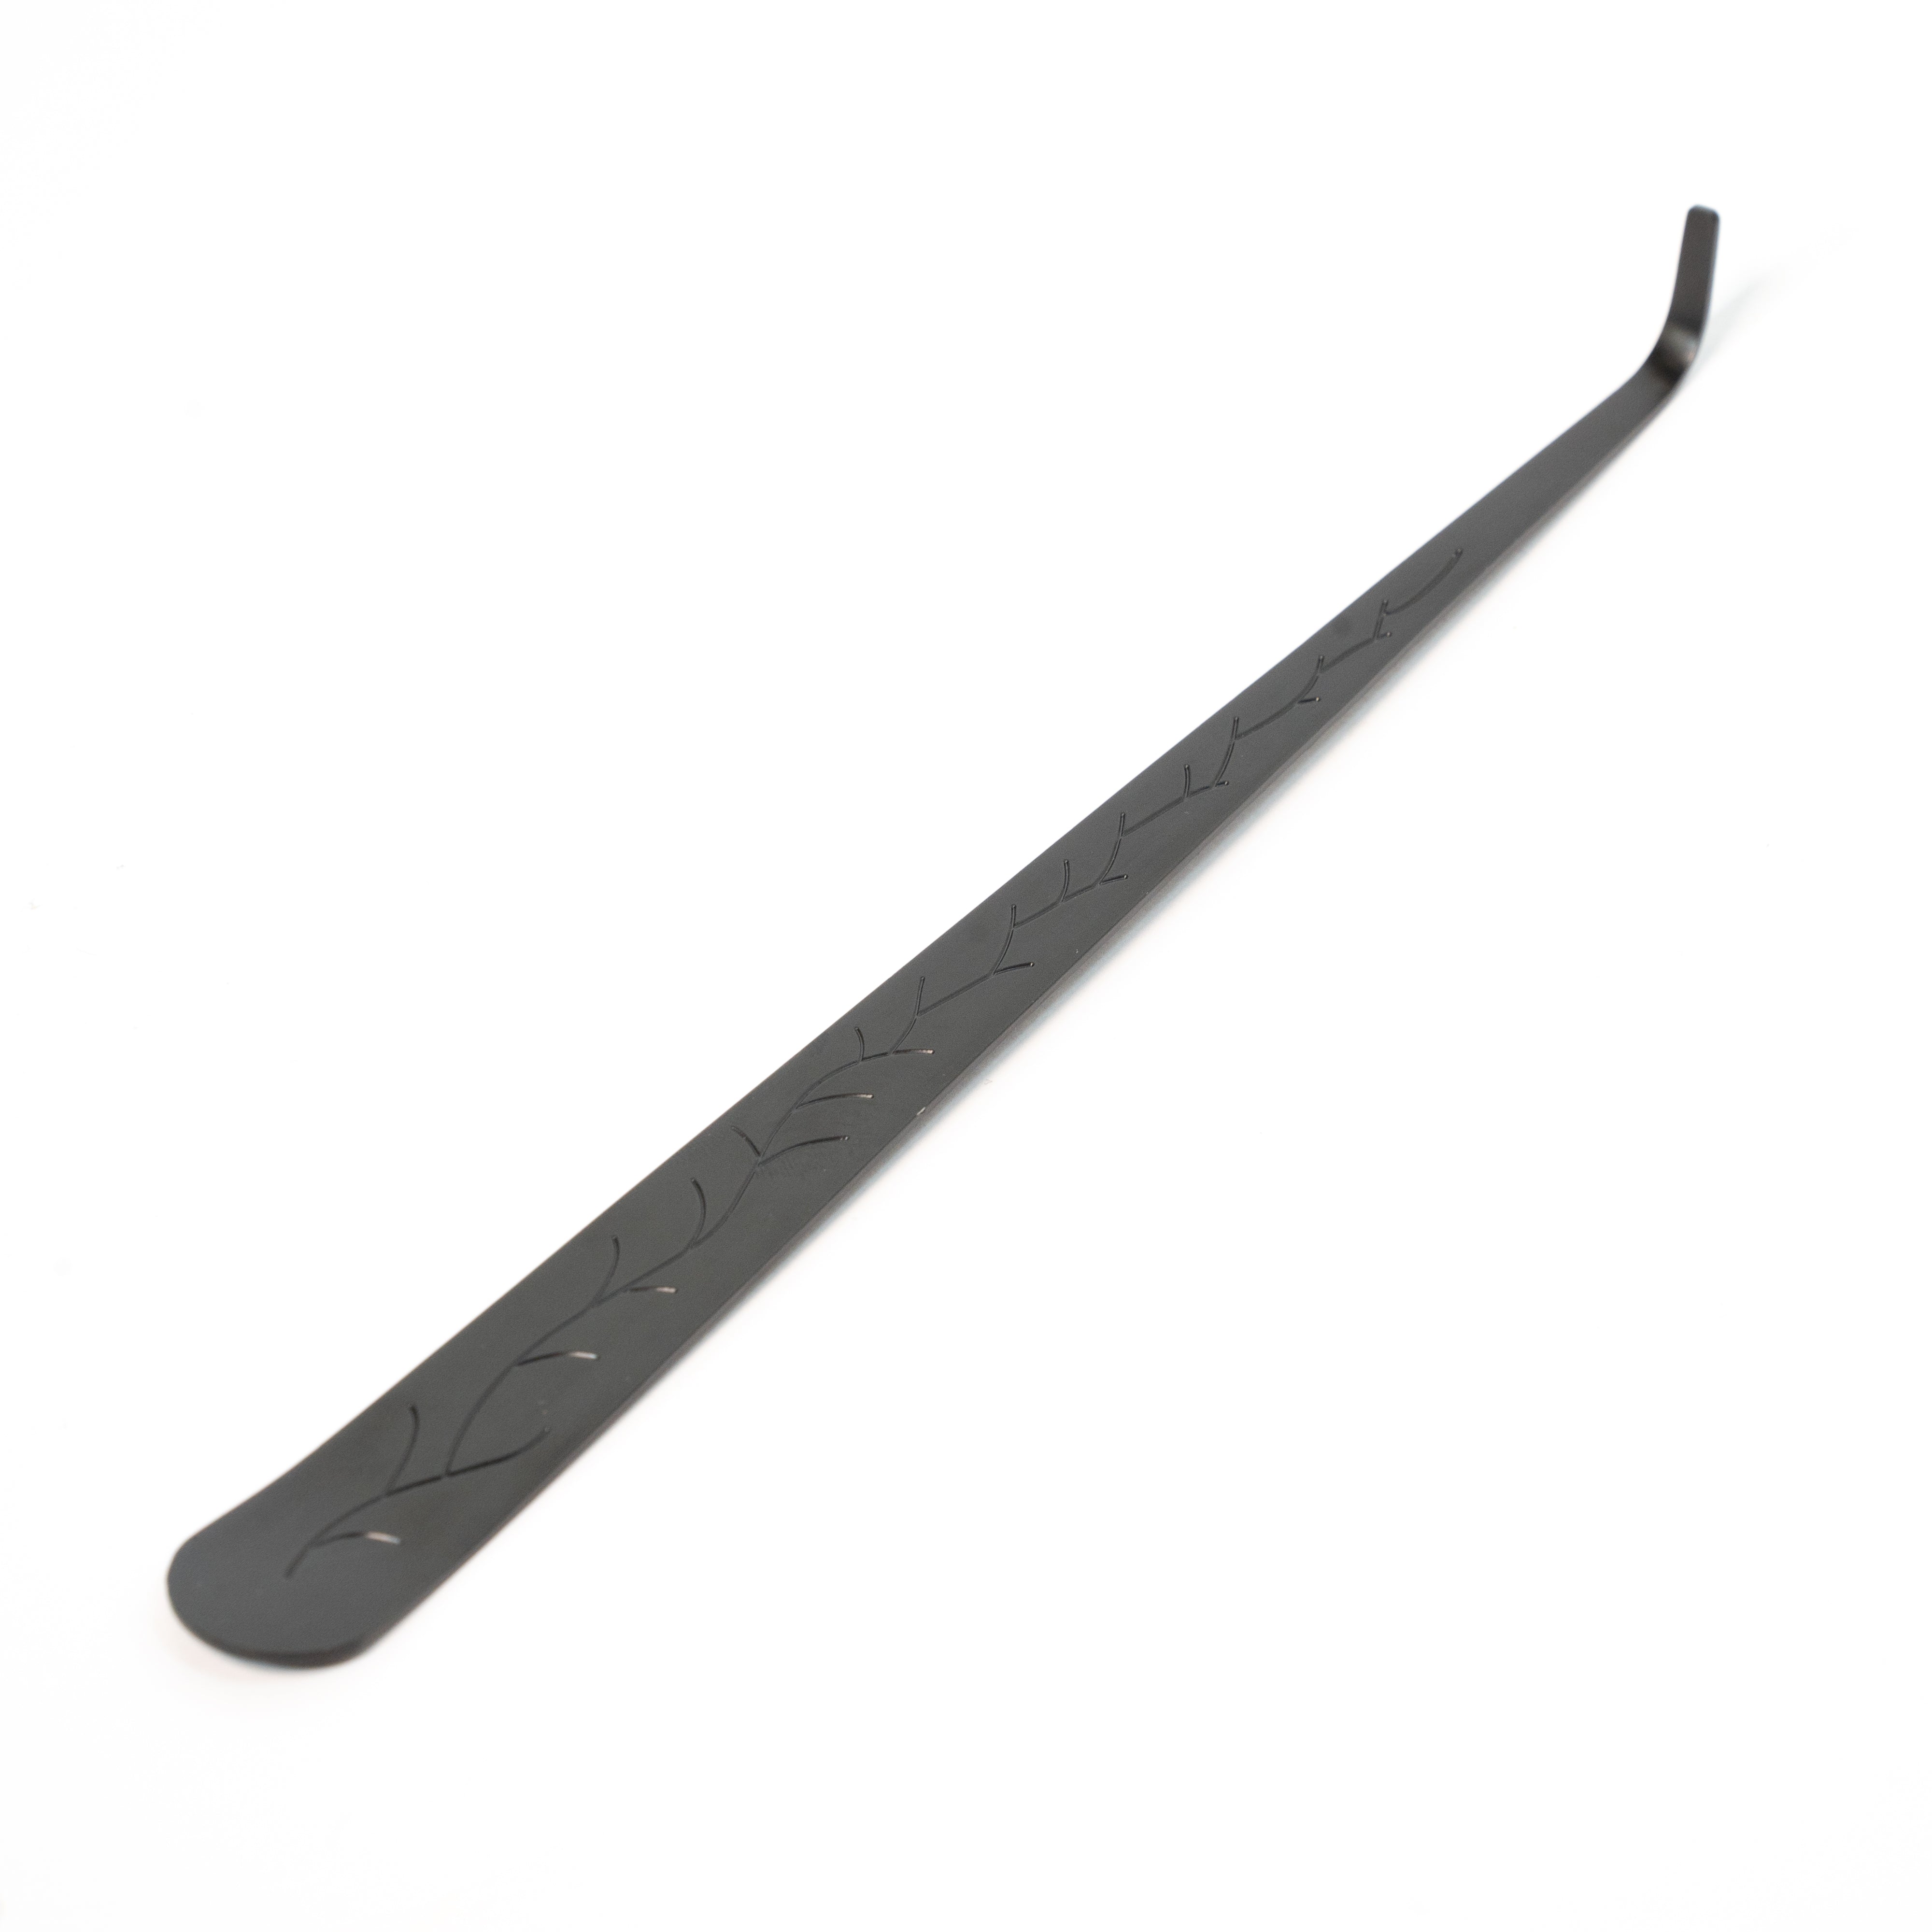 DIST - Candle Accessory (Candle Snuffer)